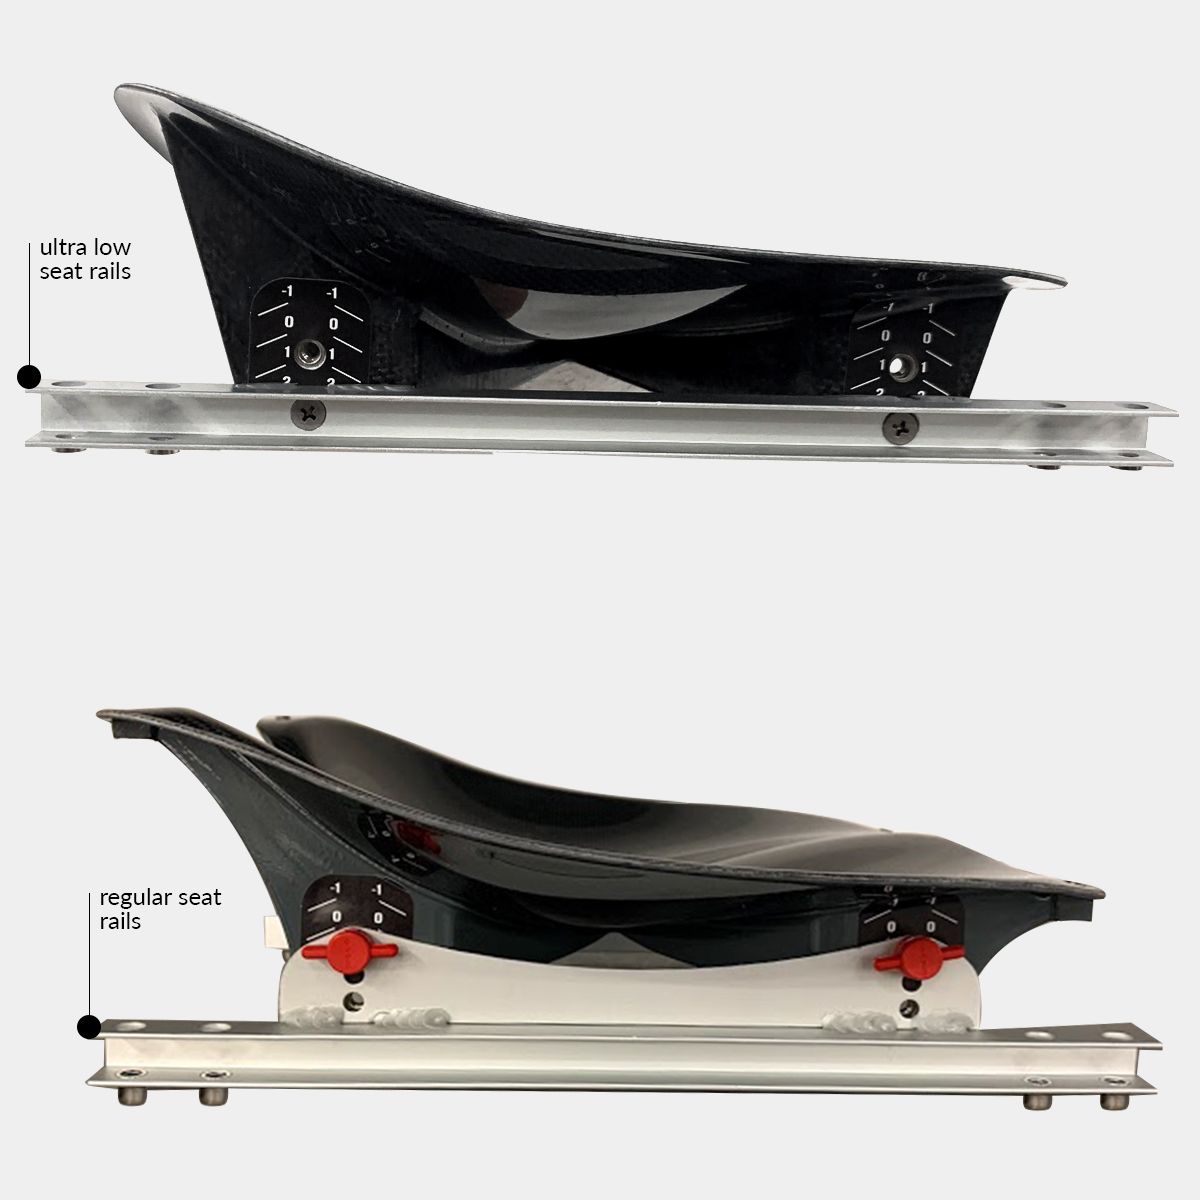 Nelo seat rails extra low compared to standard rails